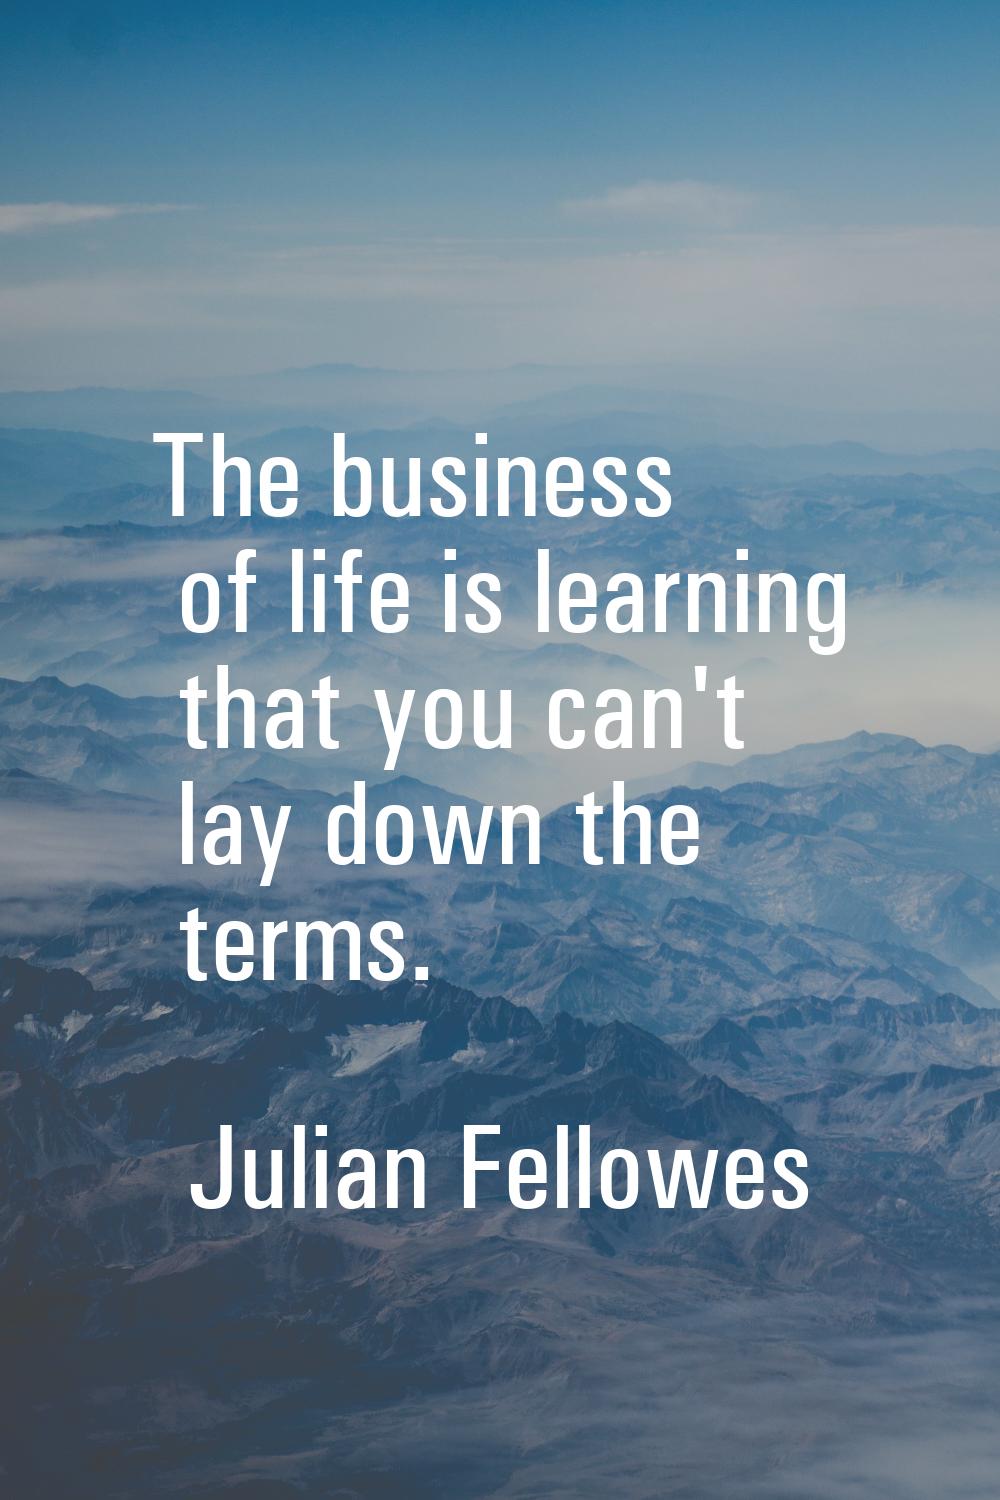 The business of life is learning that you can't lay down the terms.